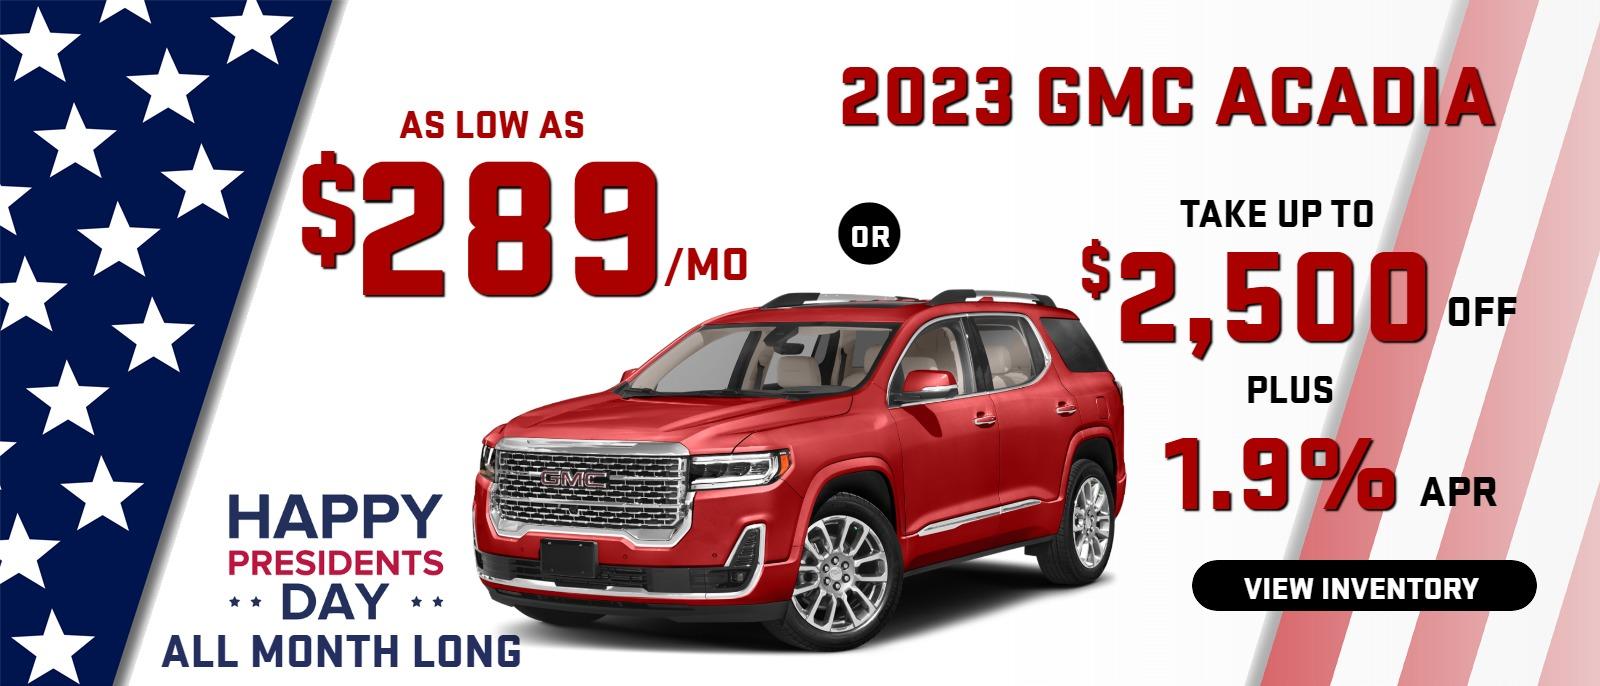 2023 Acadia
Stock G6065

take up to $2500 OFF
OR 
AS LOW AS
$289/mo
& 1.9% finance